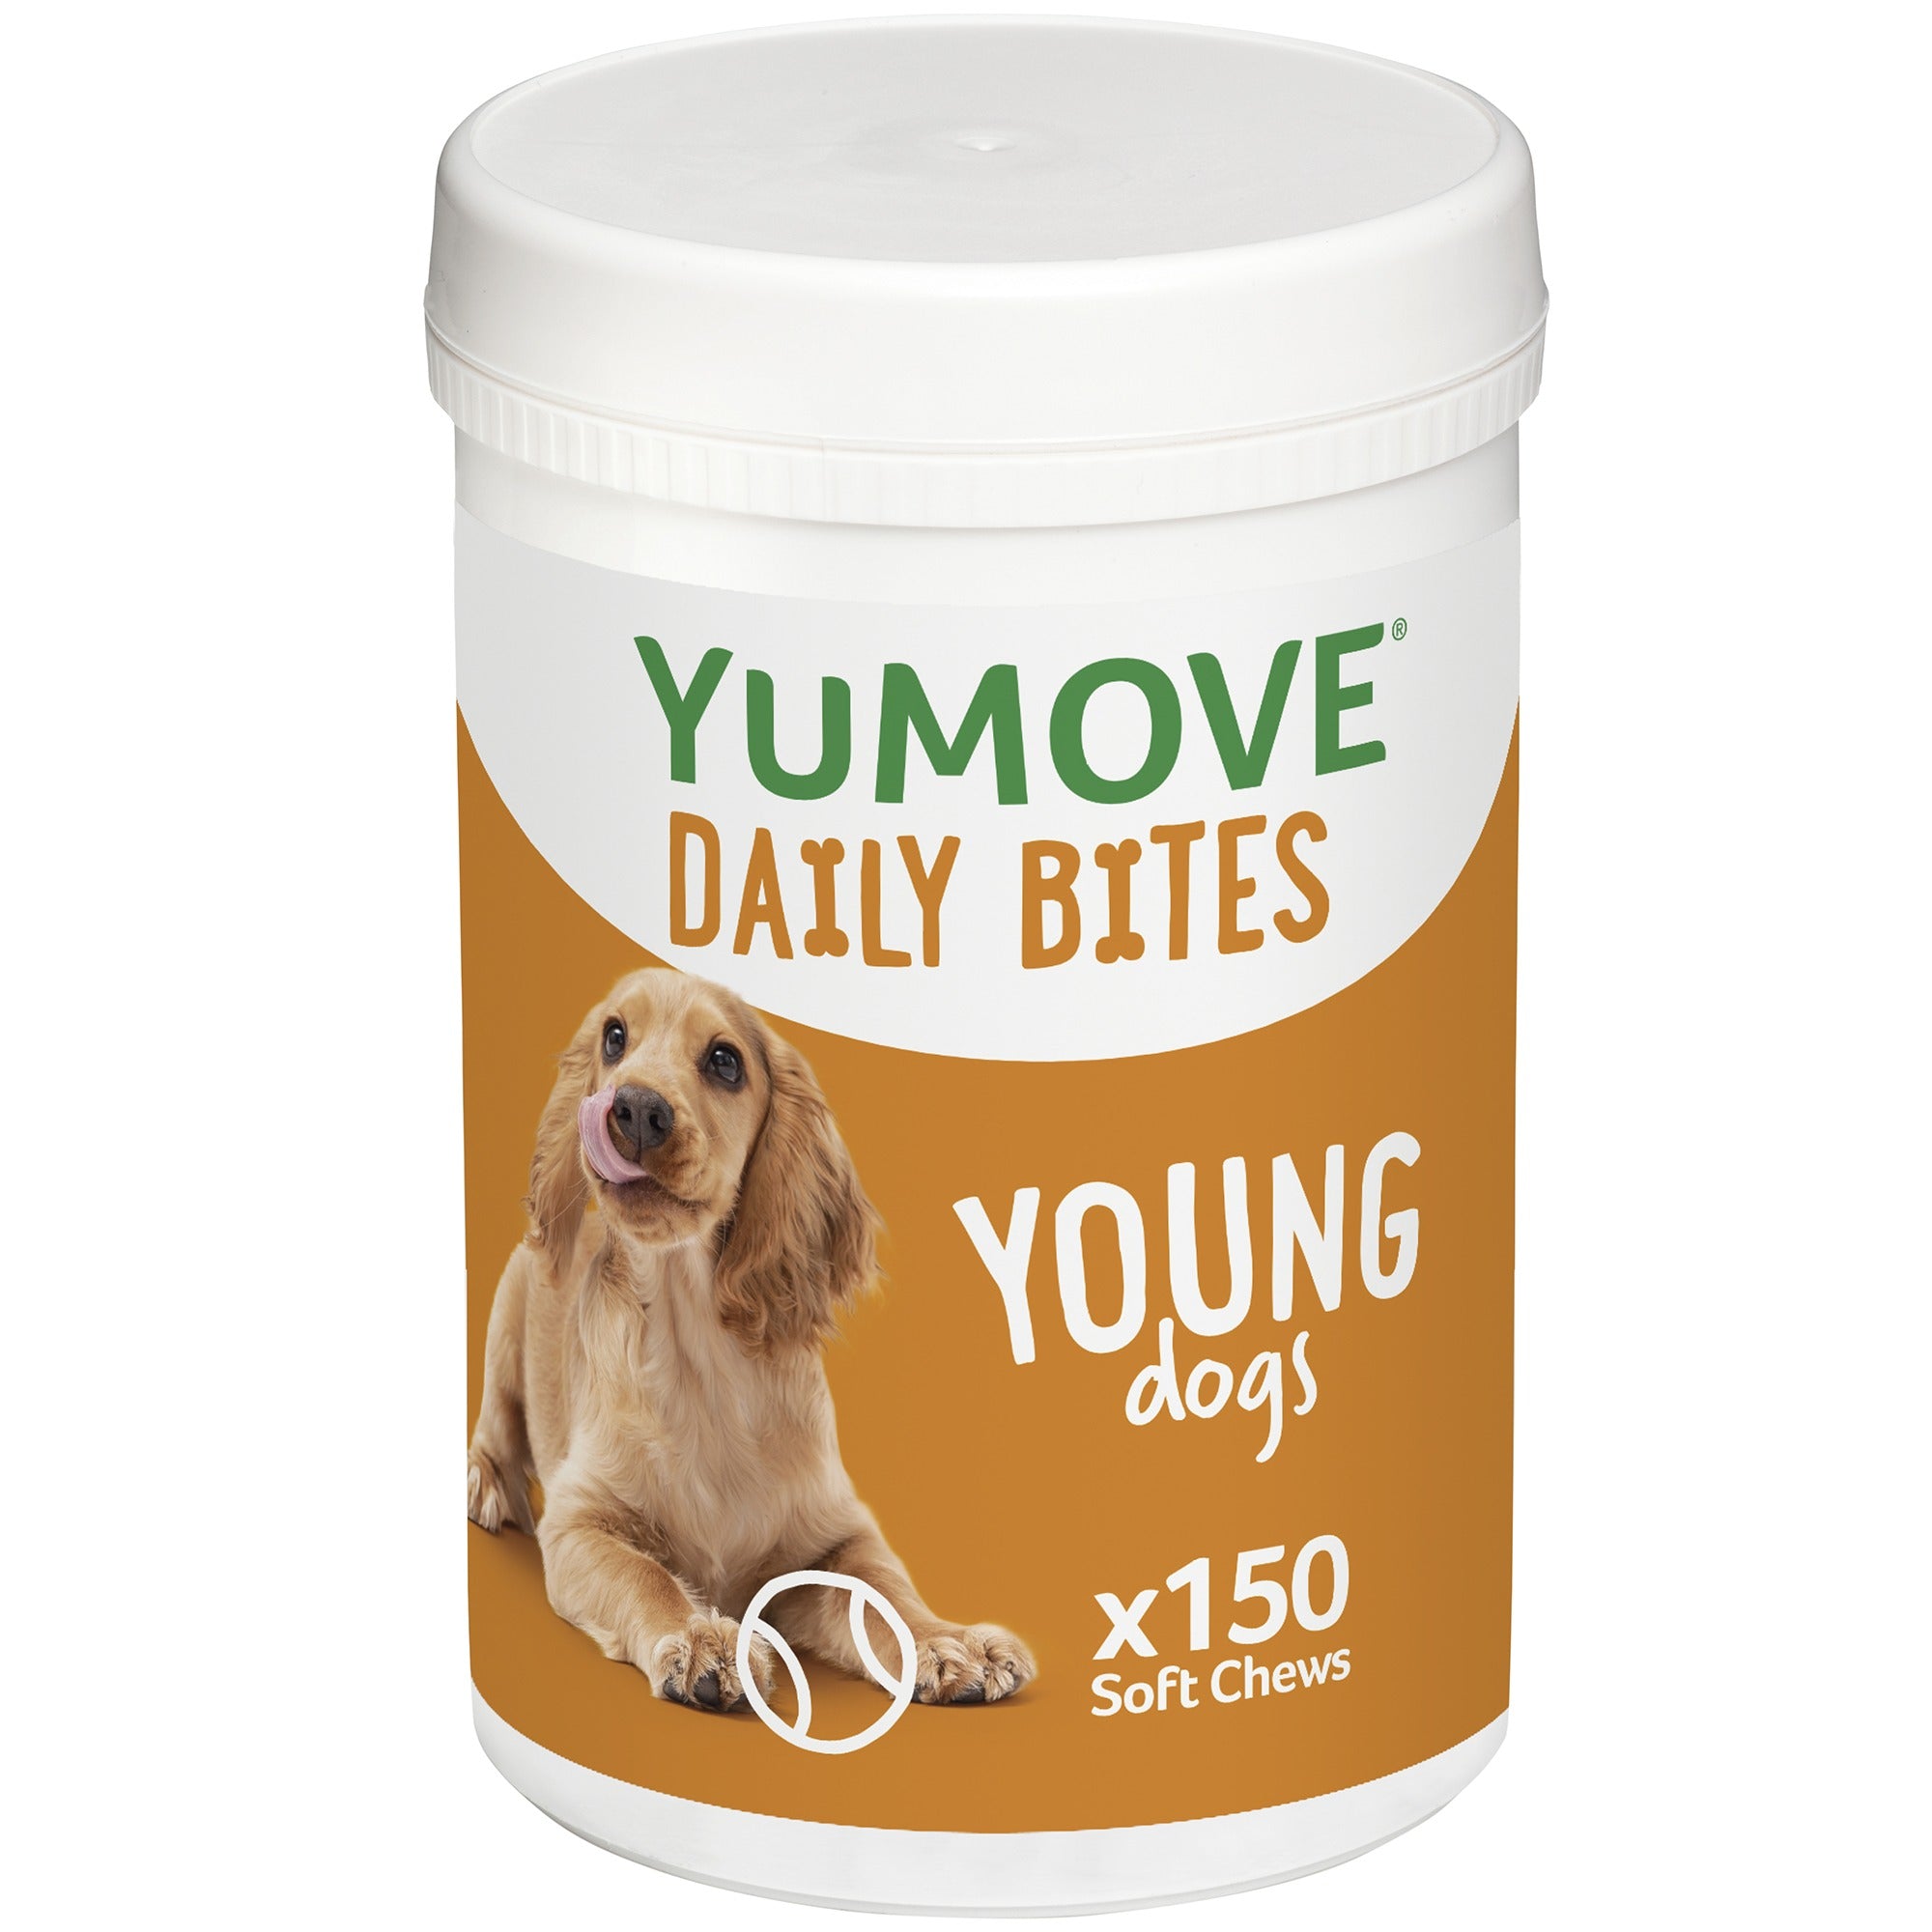 YuMOVE Joint Care Daily Bites for Young Dogs